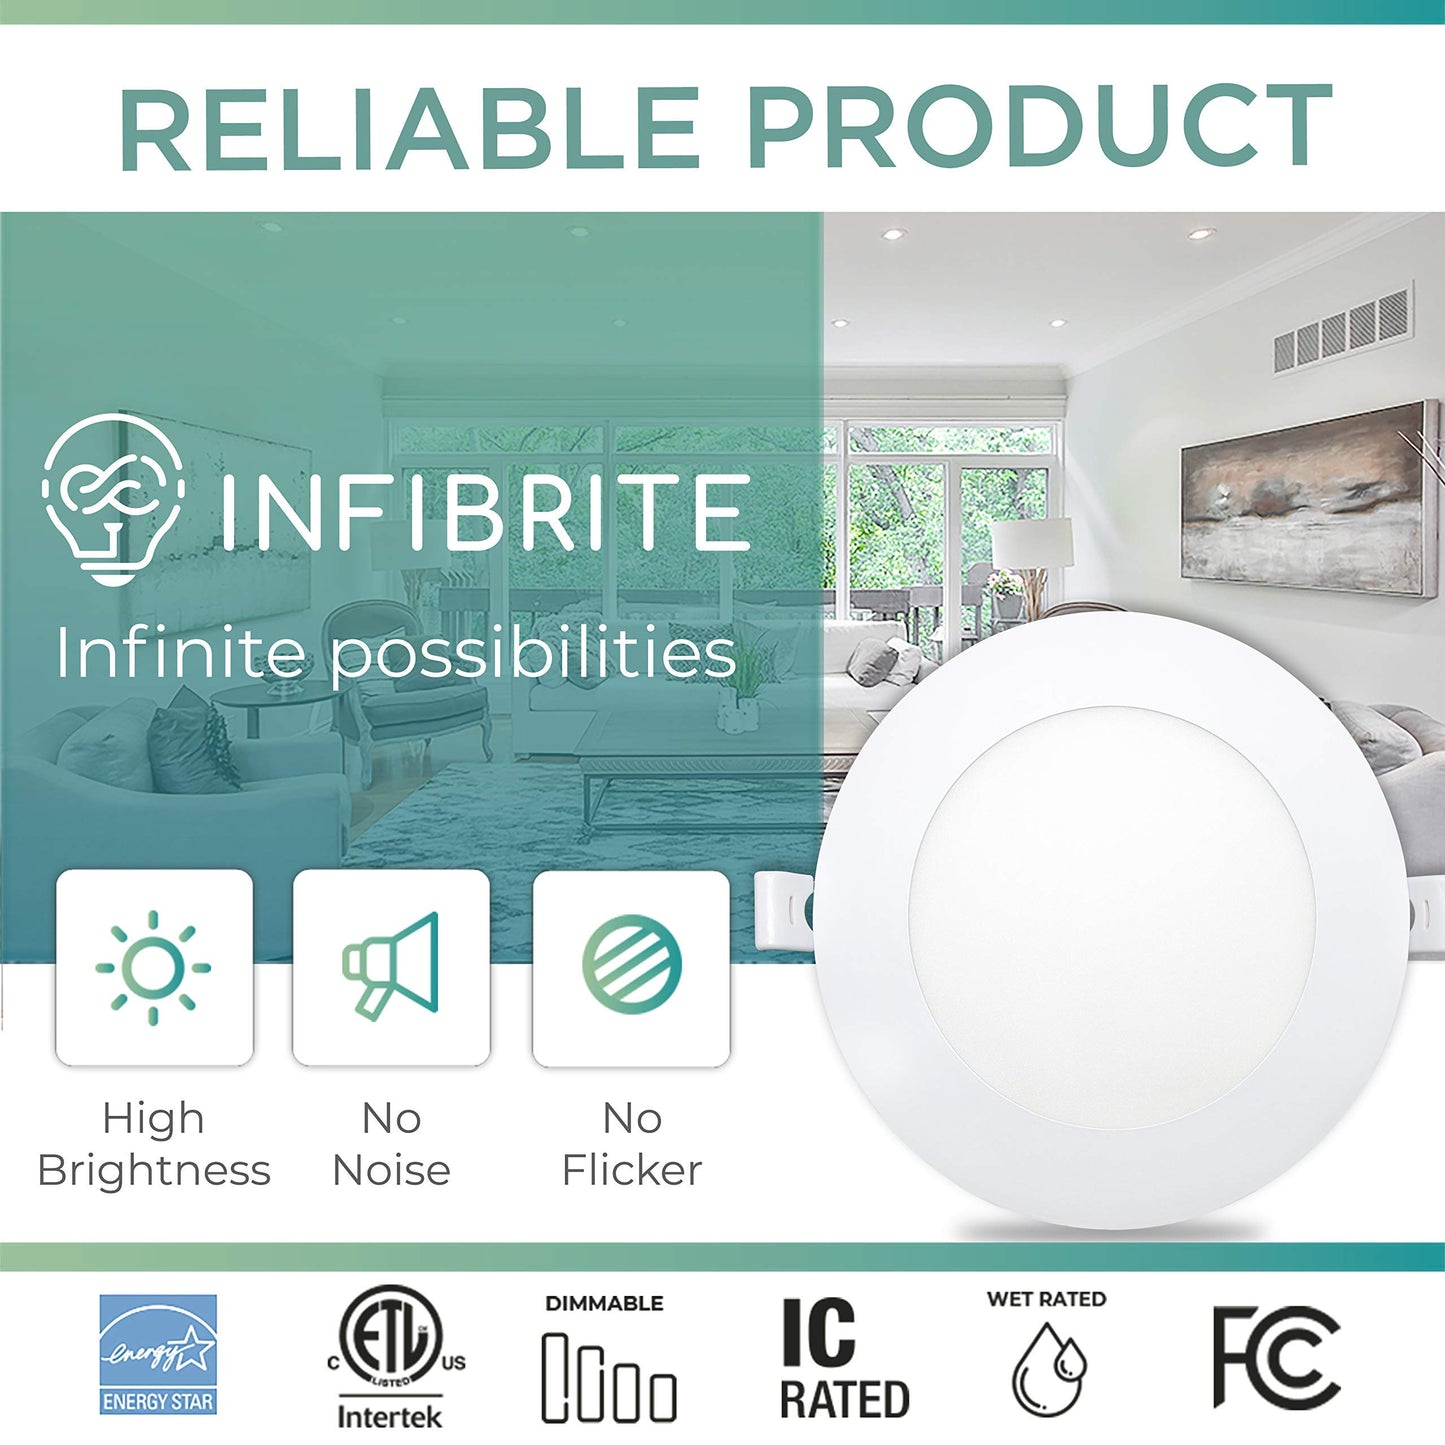 INFIBRITE 6 Inch 3000K 12W 1050LM Ultra-Thin Recessed LED Ceiling Light with Junction Box, Flush Mount, Dimmable, Bedroom, Bathroom, Wet Rated, 110W Eqv, ETL & Energy Star, Warm White (6 Pack)